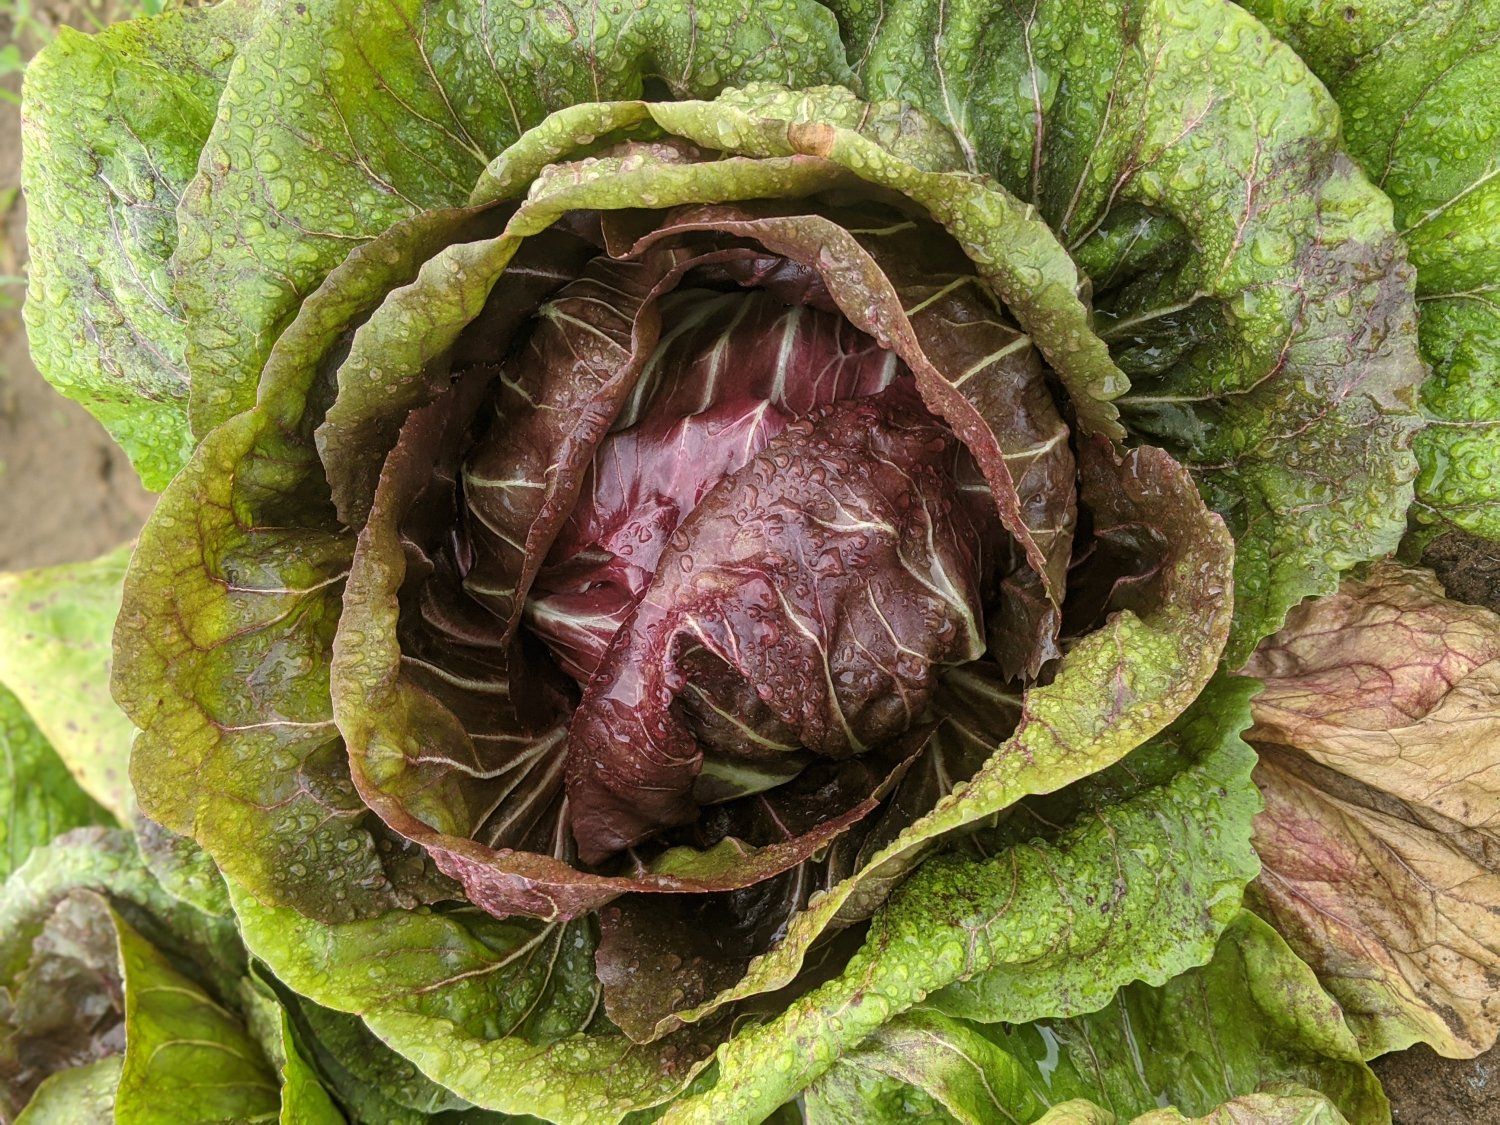 Previous Happening: Radicchio- perfect green for winter salads